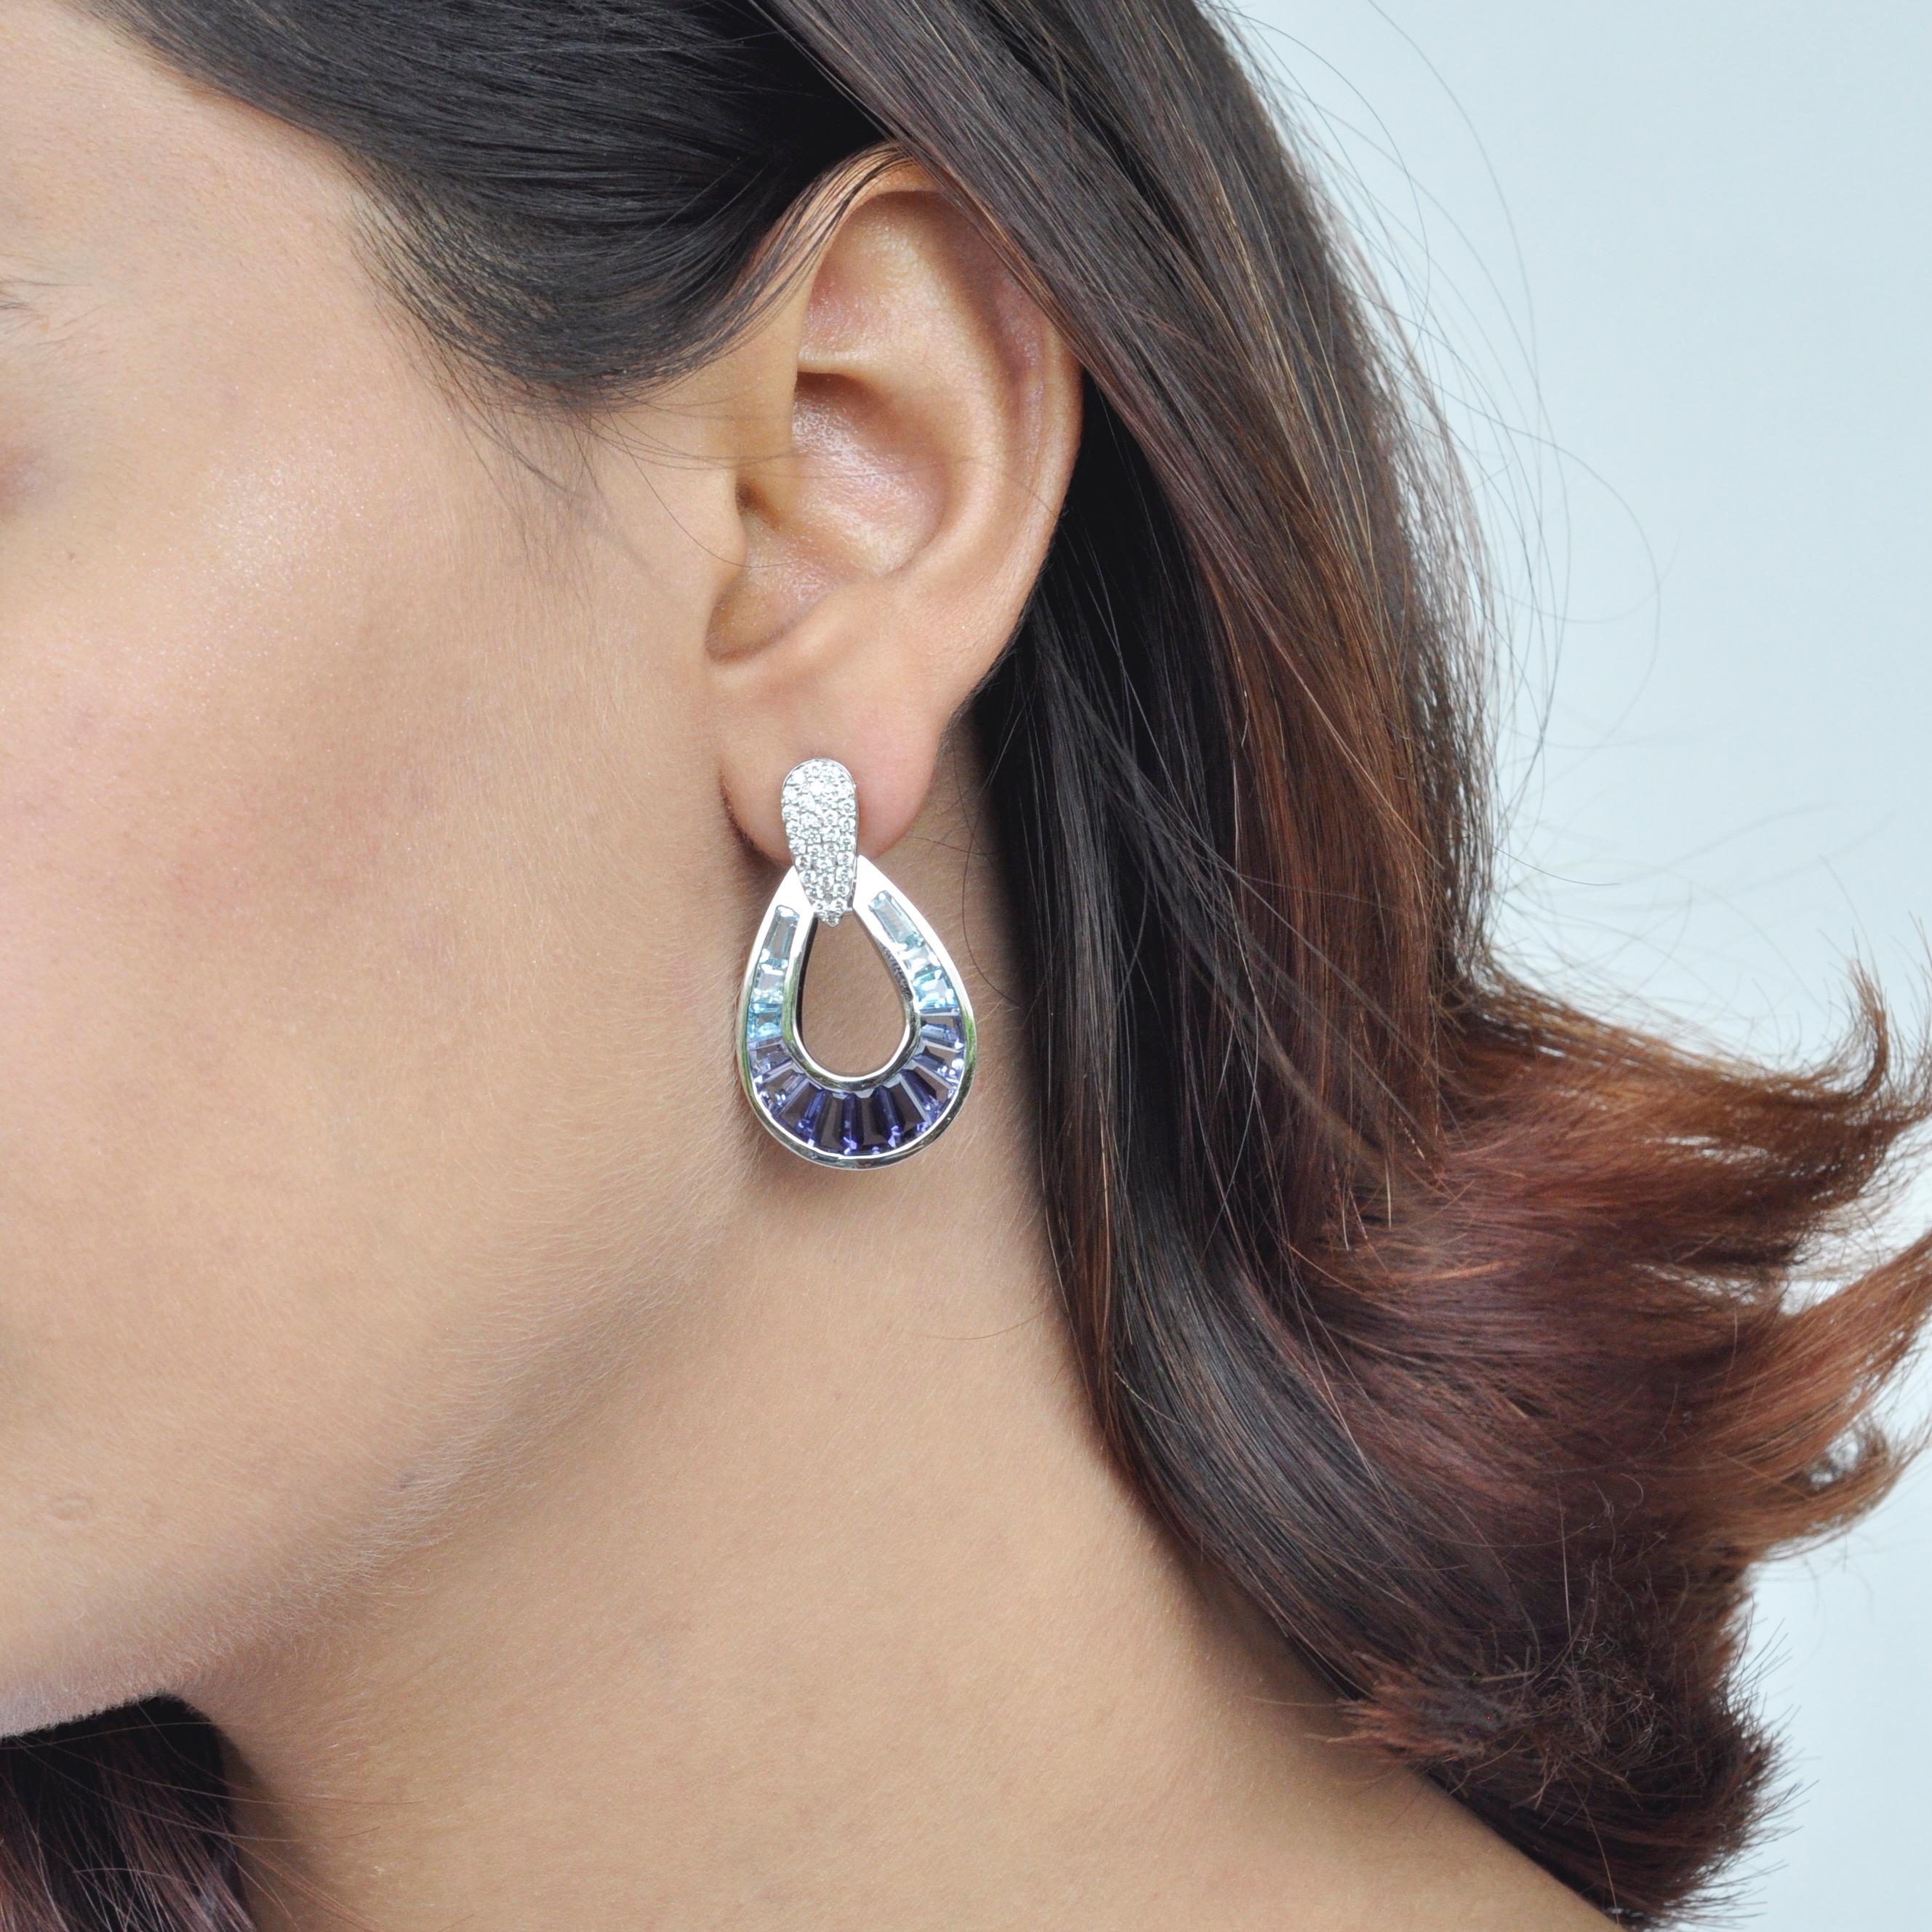 Art, color and culture all come together to inspire this Côte d'Azur 18 karat white gold aquamarine, iolite, blue topaz baguette and diamond raindrop earrings, where the cool shades of aquamarine, iolite and blue topaz captures the mood of the